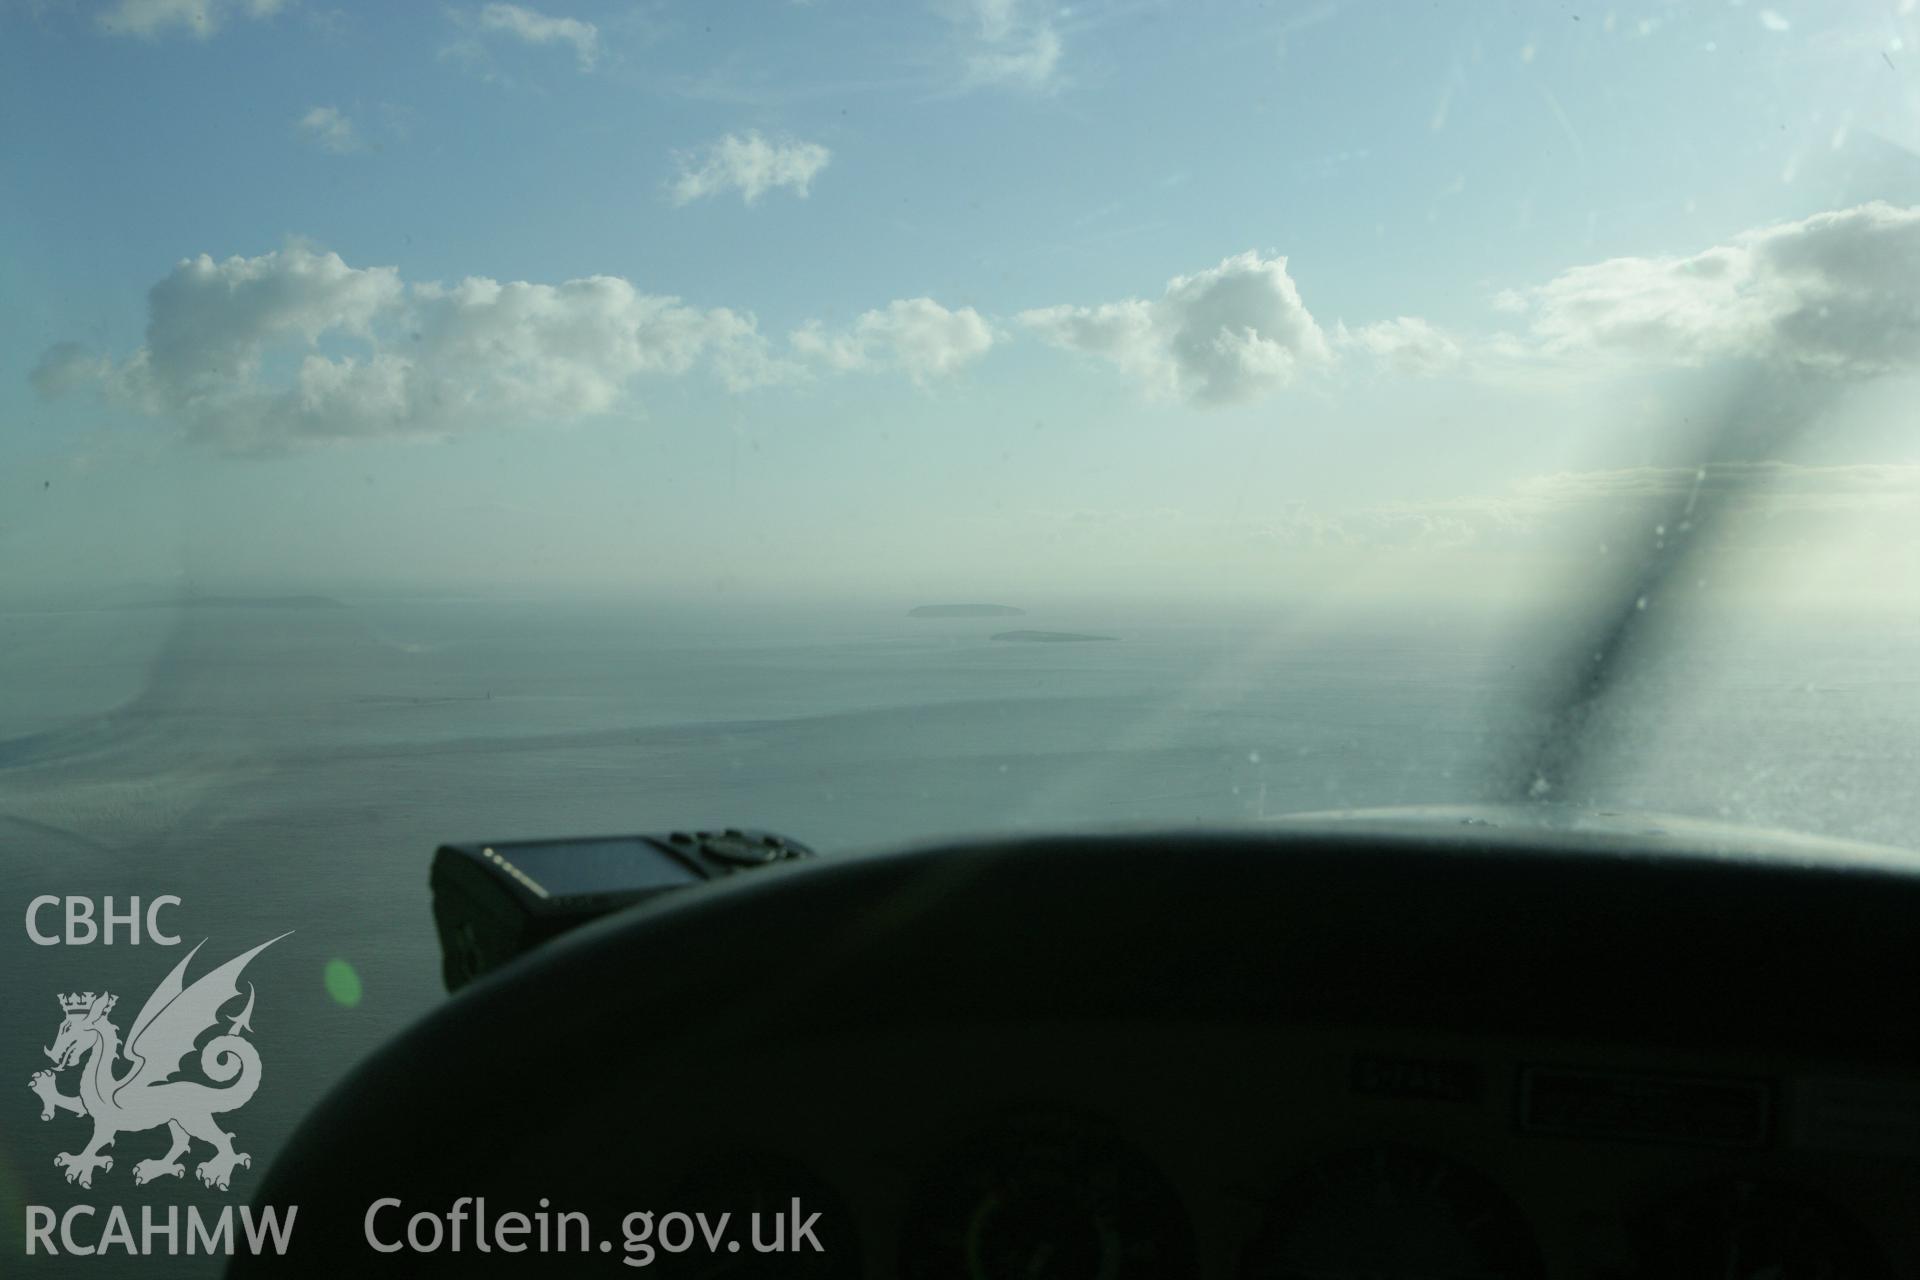 RCAHMW colour oblique photograph of Flat Holm and Steep Holm, from the north, with aircraft cockpit. Taken by Toby Driver on 12/11/2008.